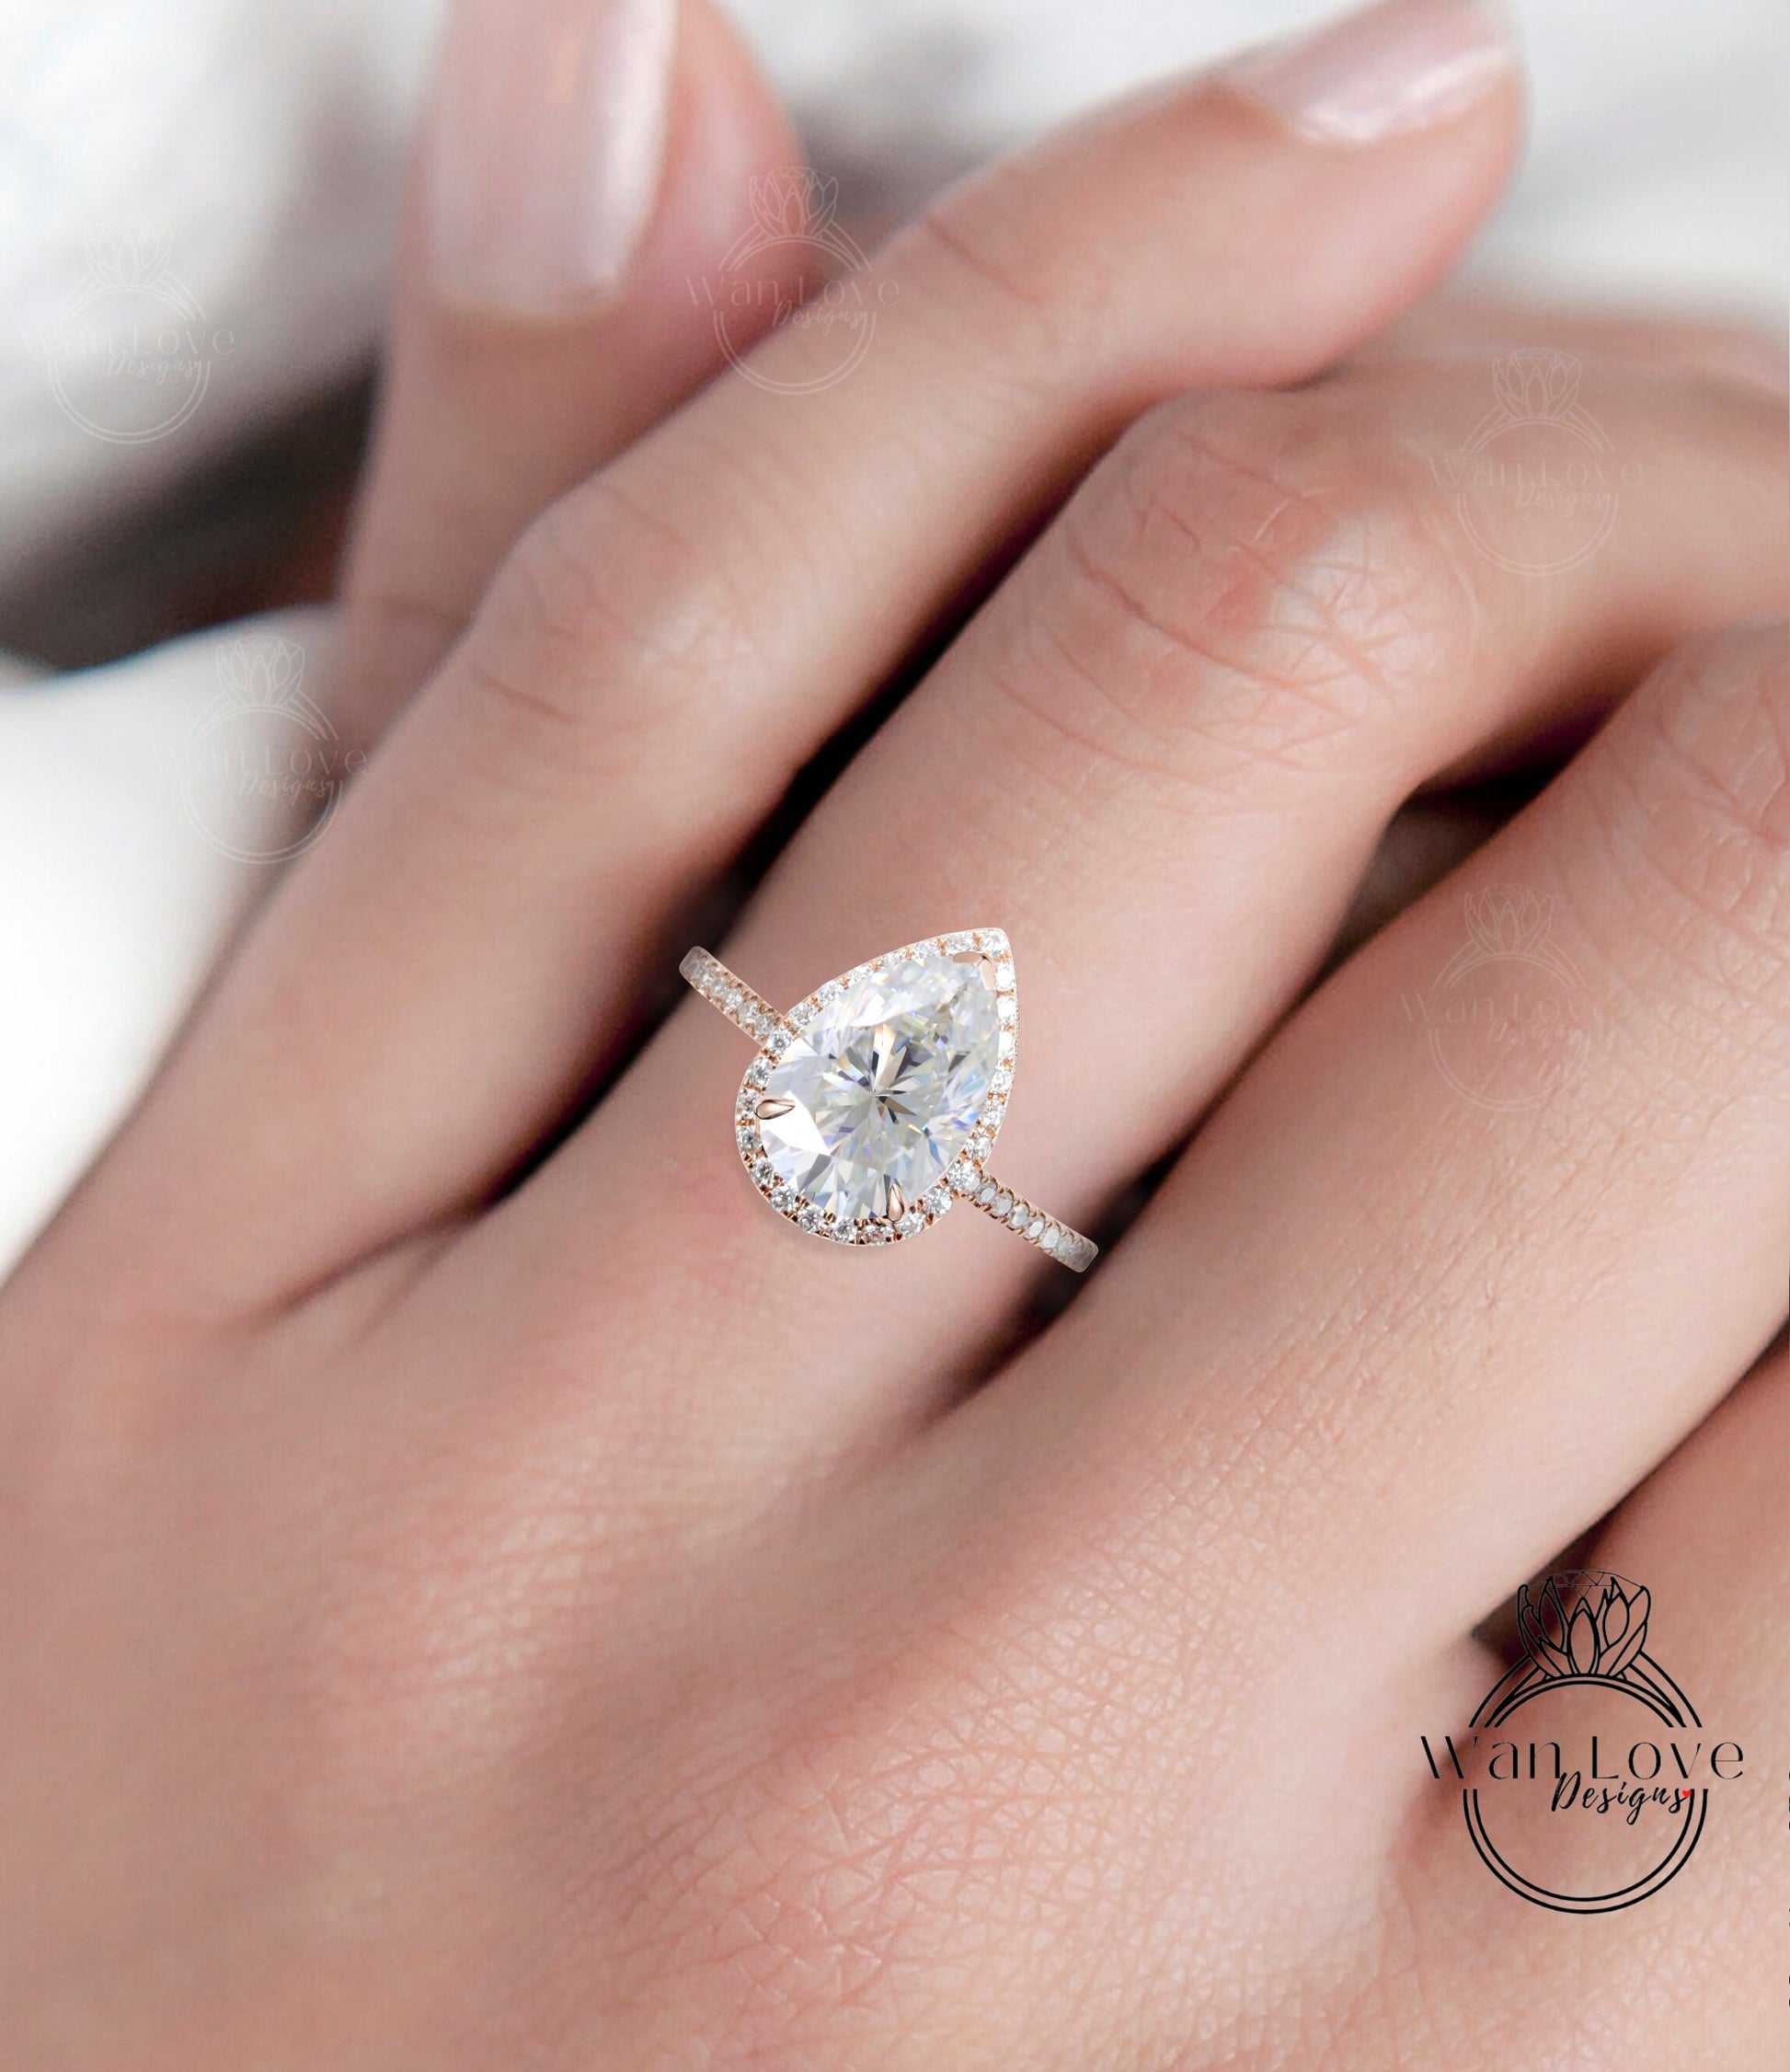 Vintage Moissanite Pear shaped Engagement Ring, Pear Cut Unique 14k Rose Gold Diamond Halo Ring, Wedding Ring Anniversary Ring Proposal Ring